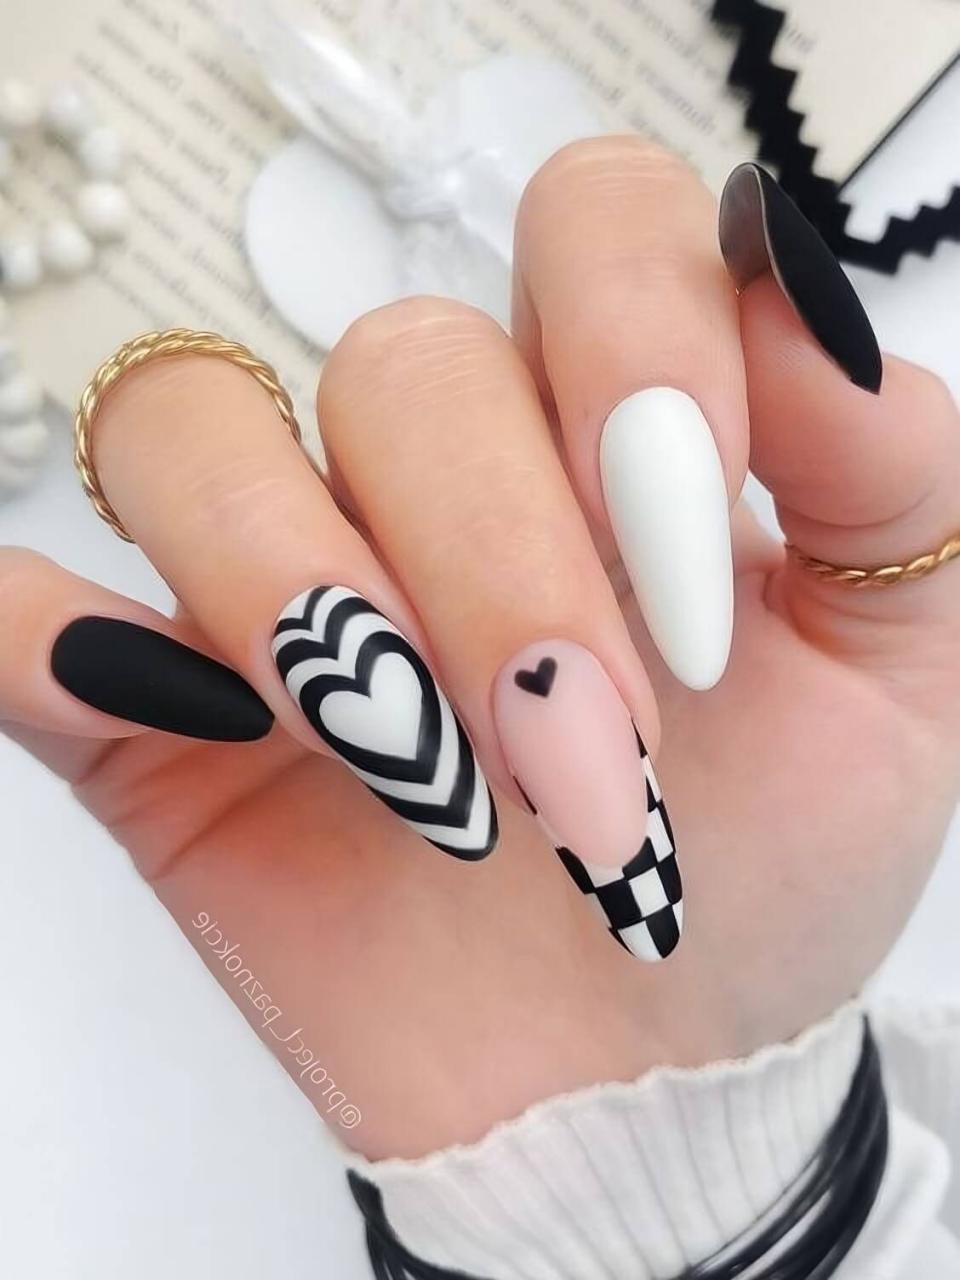 30 Classy Black Nail Designs To Glam You Up - 217